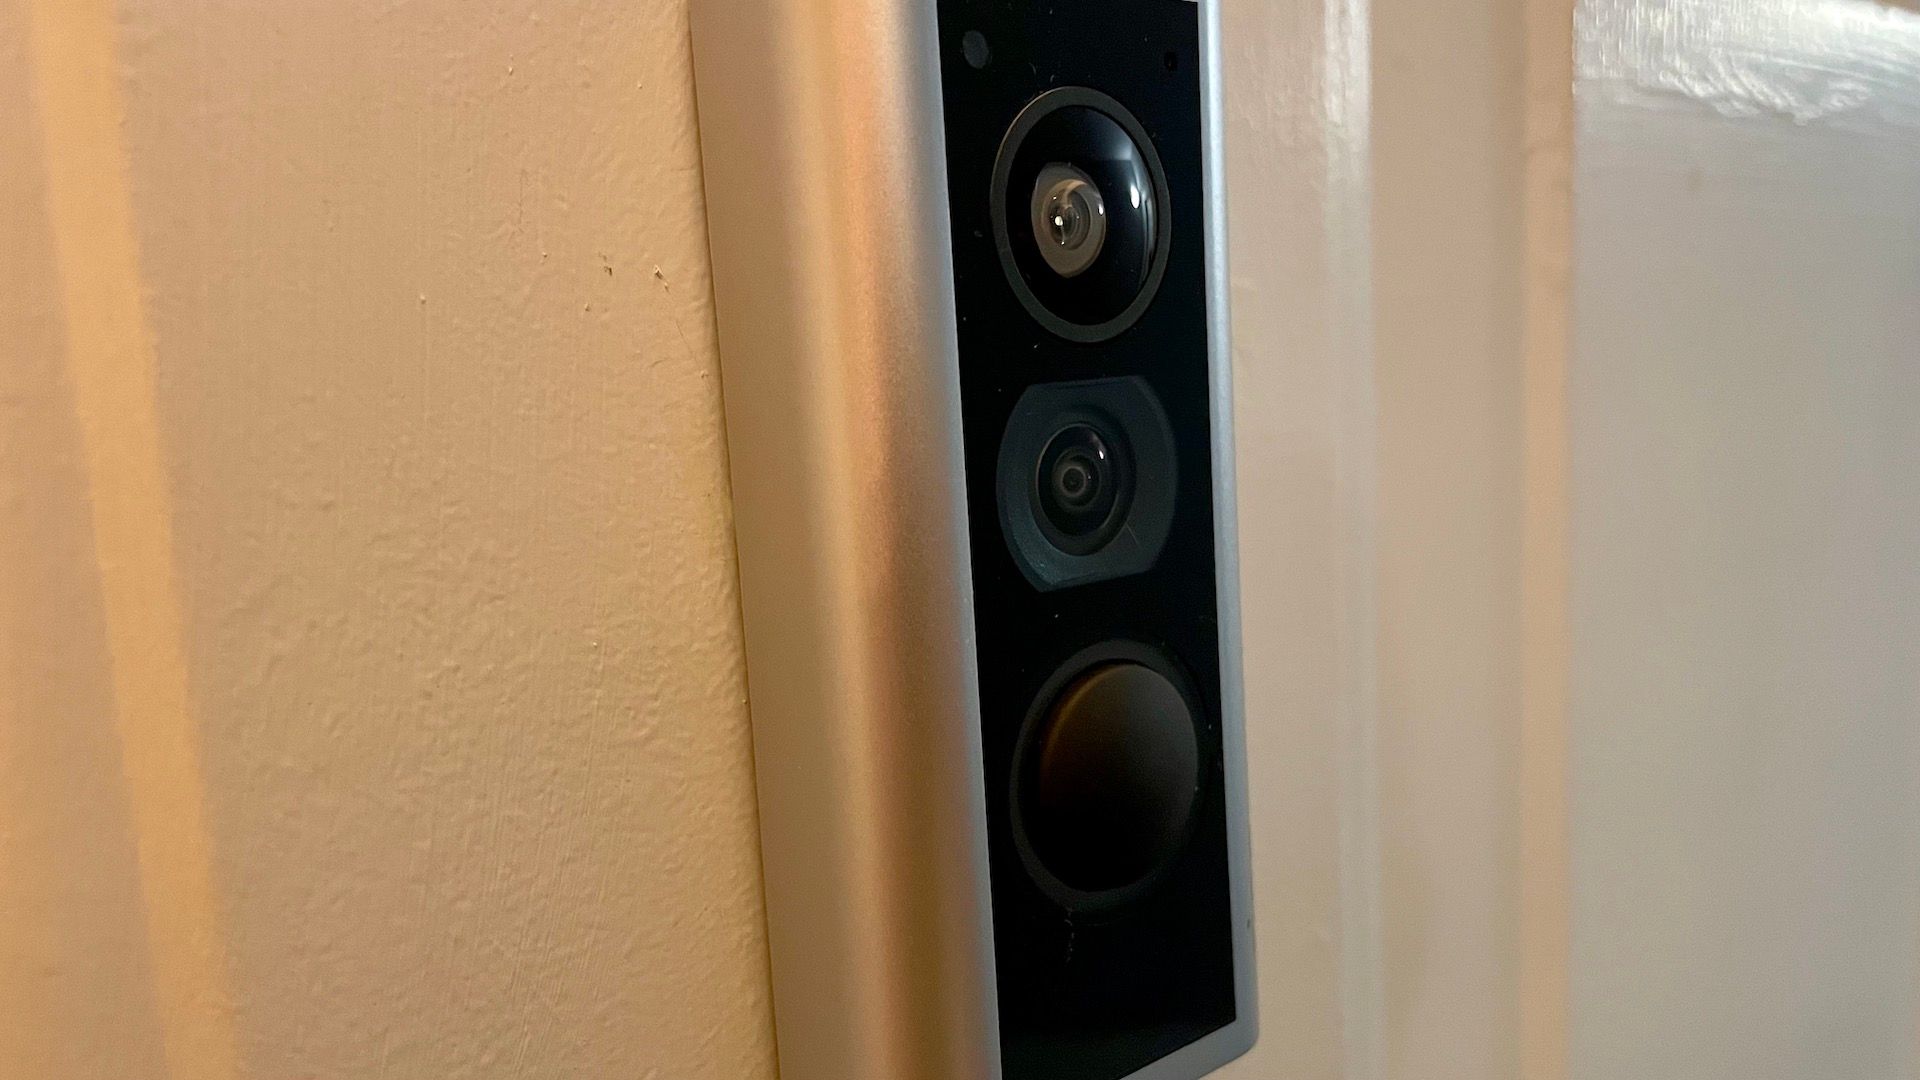 the ring peephole cam (front portion) mounted on a door